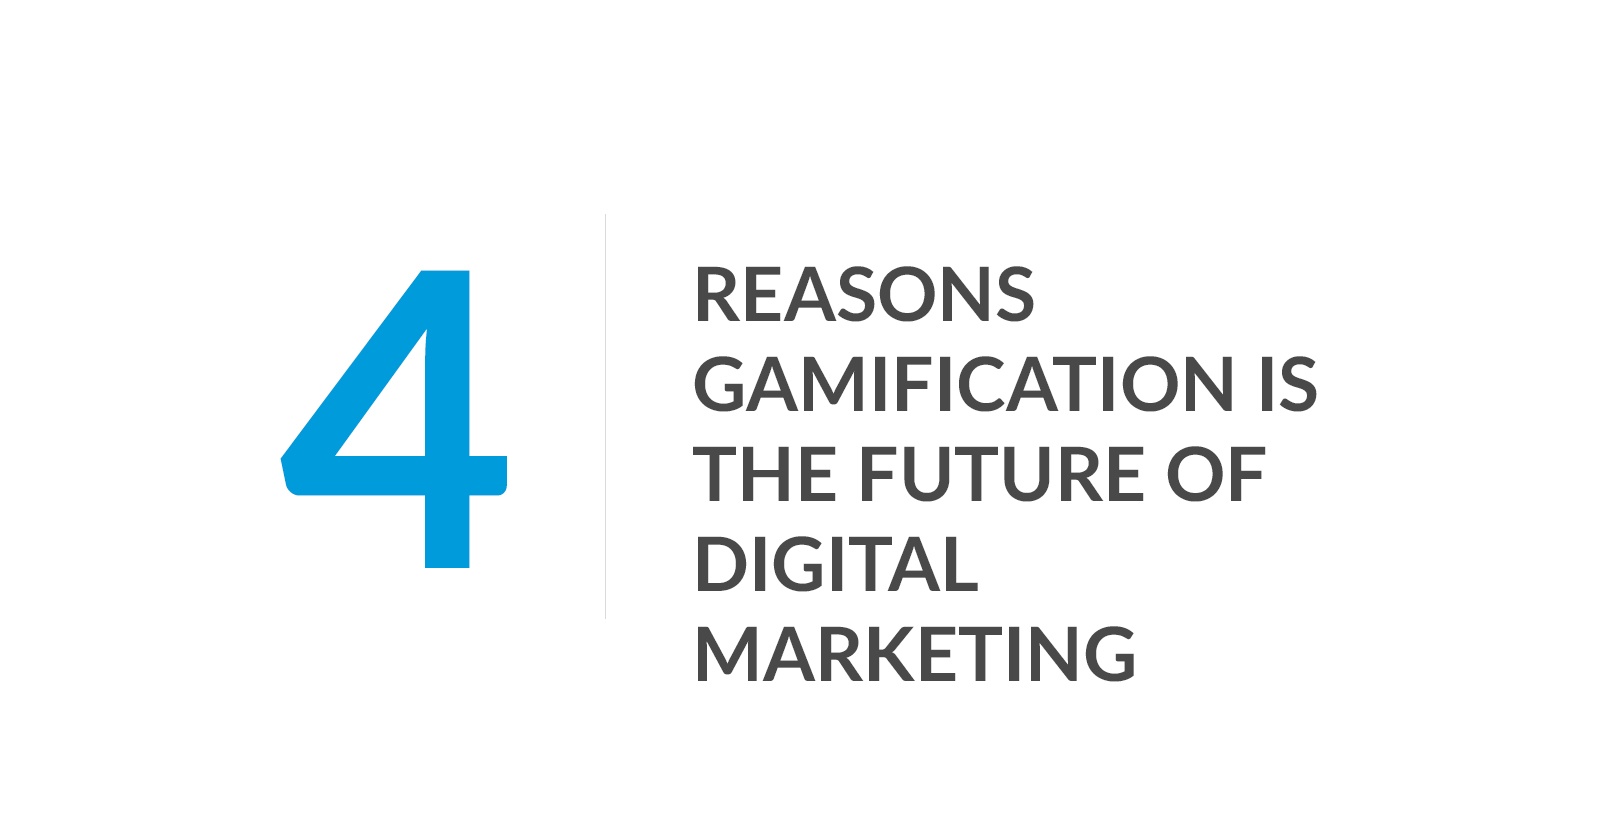 4-reasons-gamification-is-the-future-of-digital-marketing.jpg